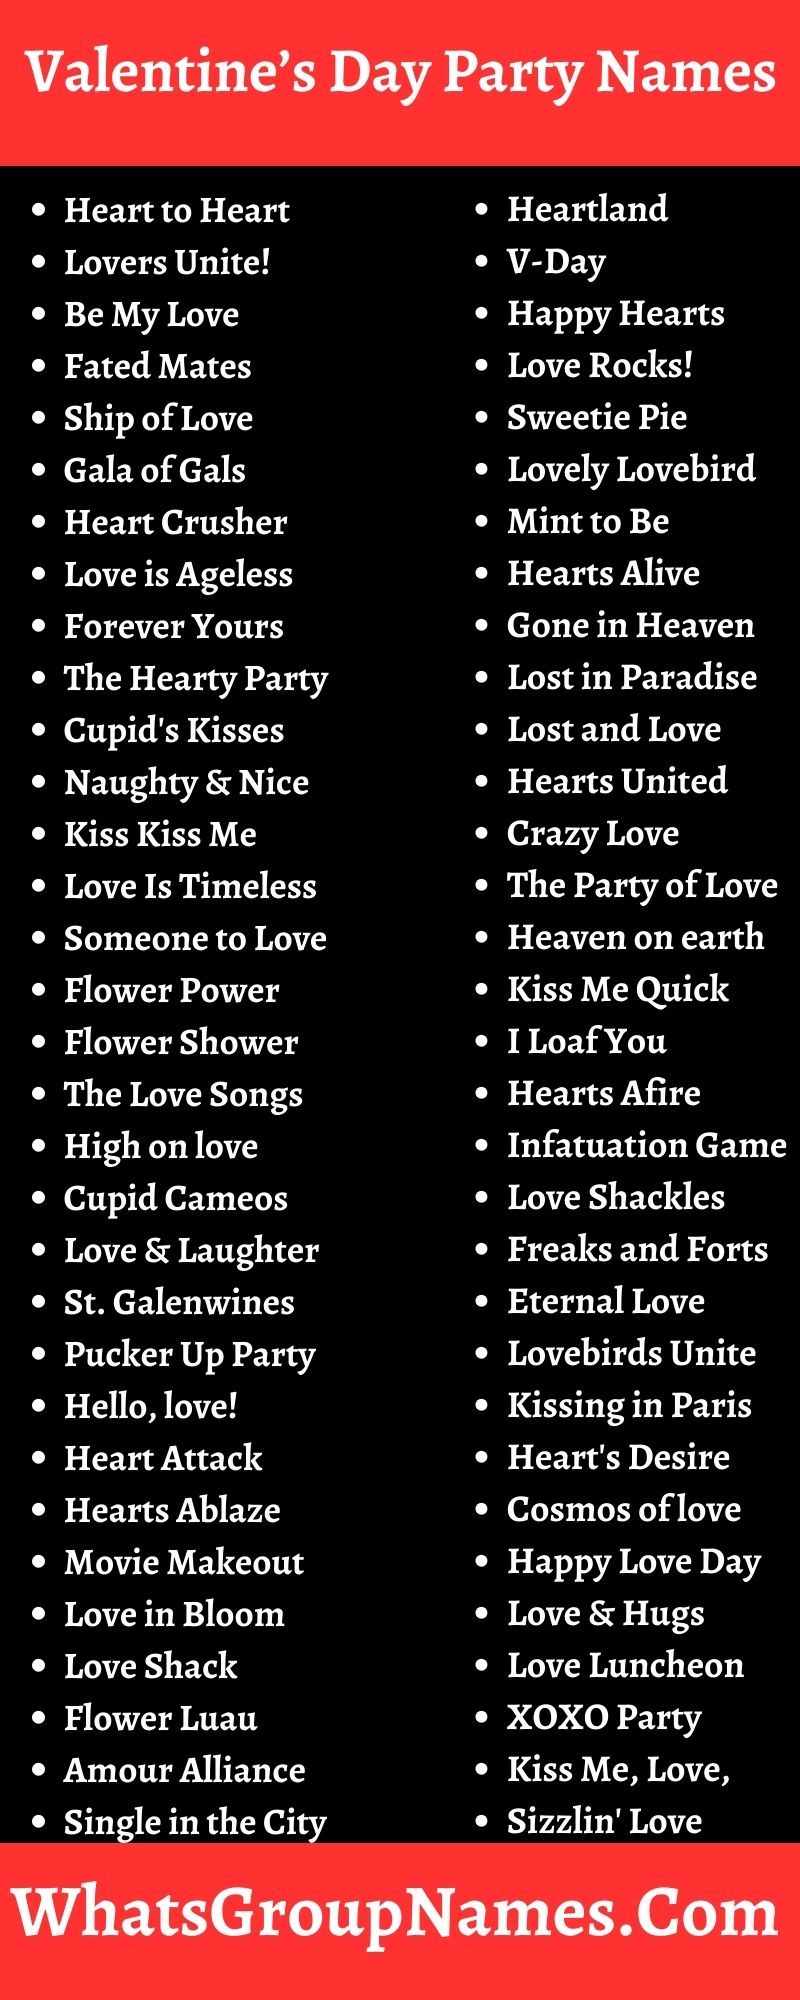 Valentine’s Day Party Names